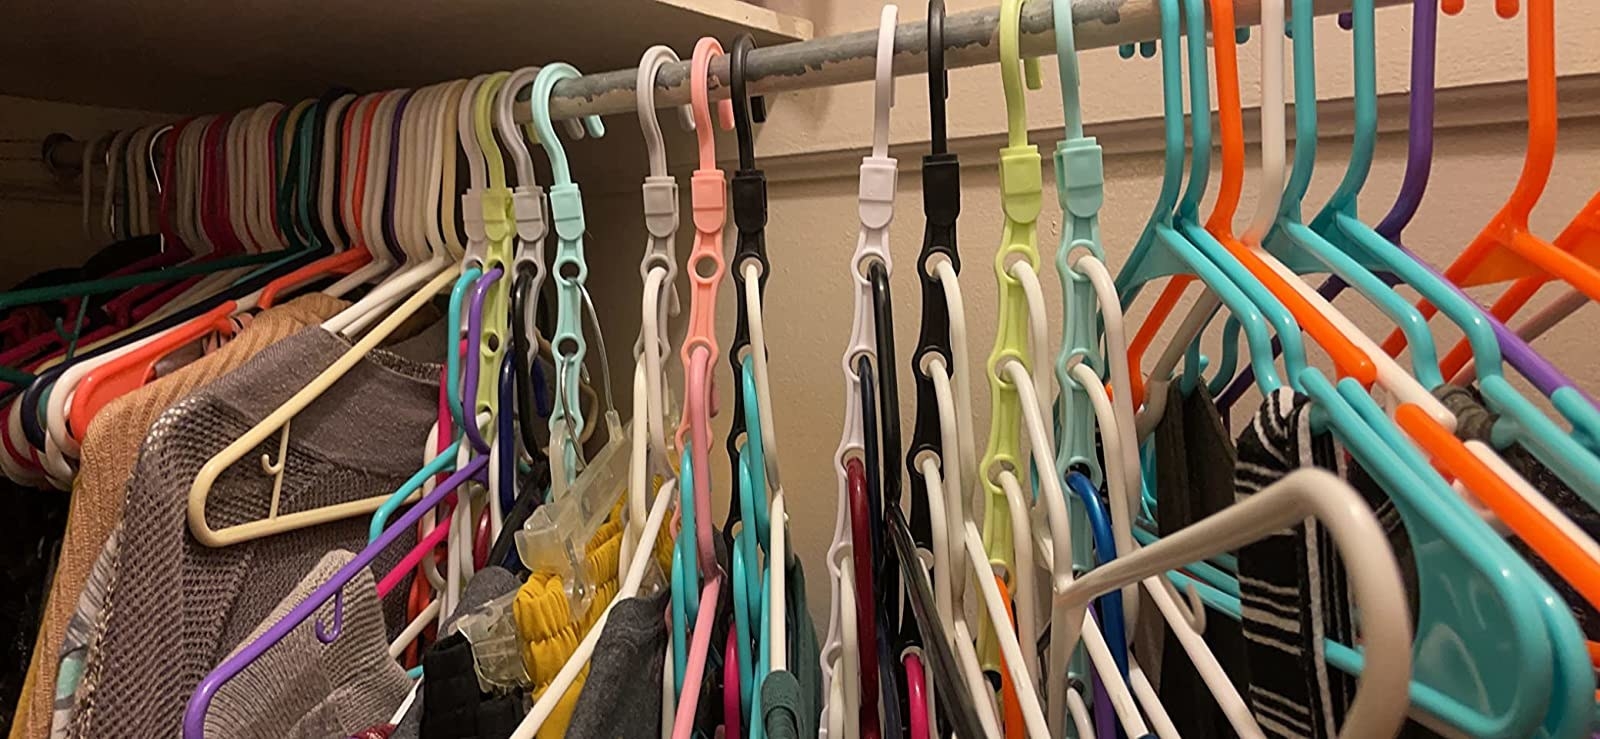 a reviewer photo that shows multiple hangers hanging from one organizer saving room for more storage